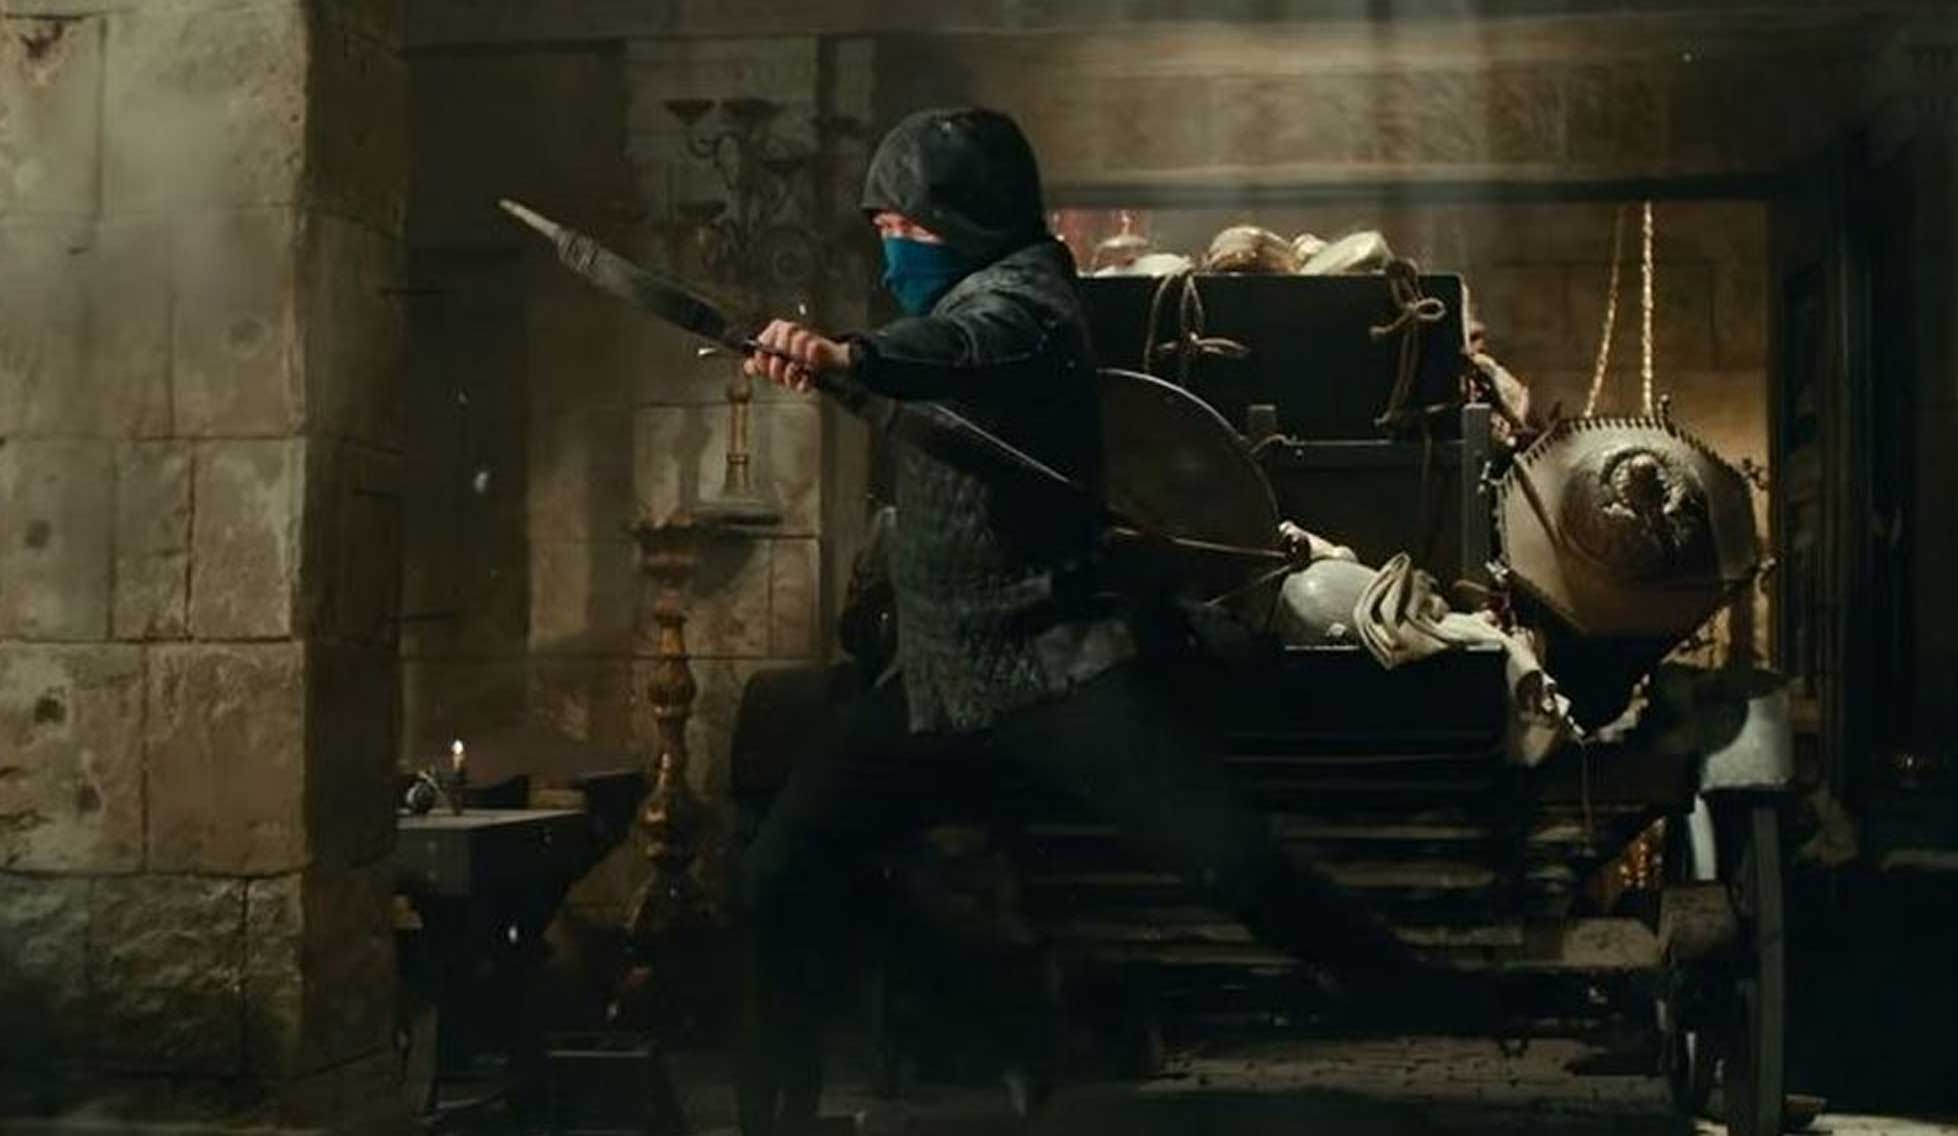 The Final Action-Packed Trailer For 'Robin Hood' Lights The Flames Of Revolution